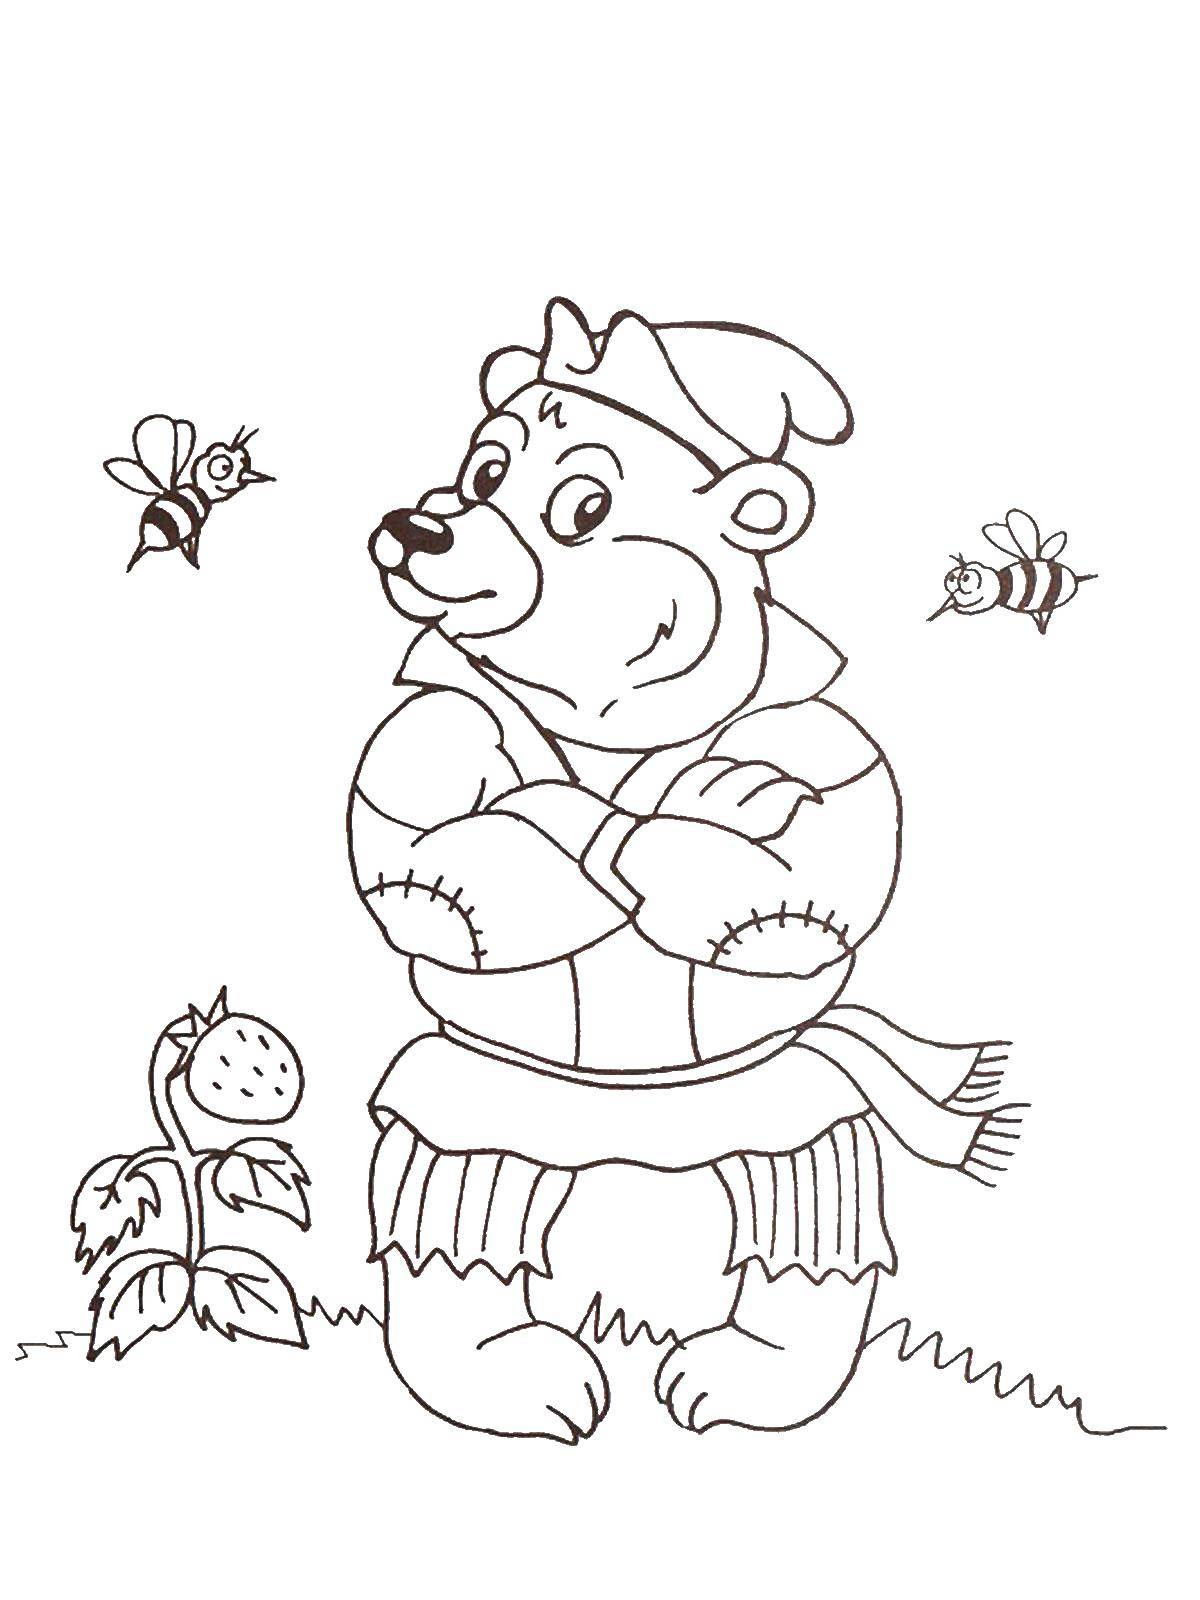 Coloring Bear waiting for a bun. Category gingerbread man . Tags:  Fairy Tales, Gingerbread Man.